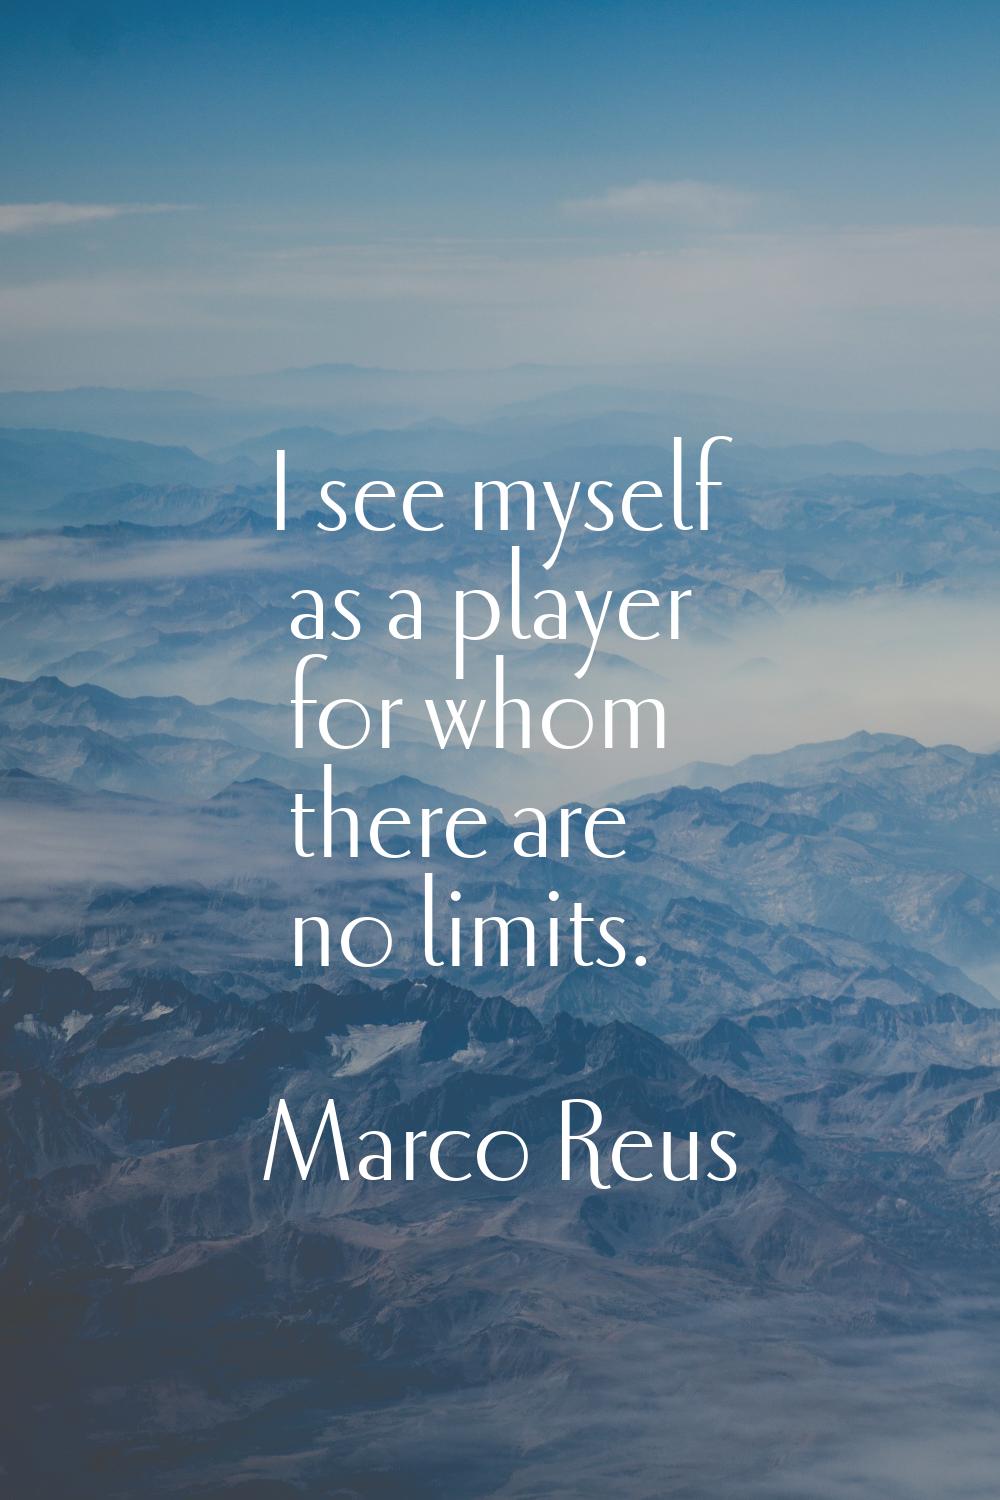 I see myself as a player for whom there are no limits.